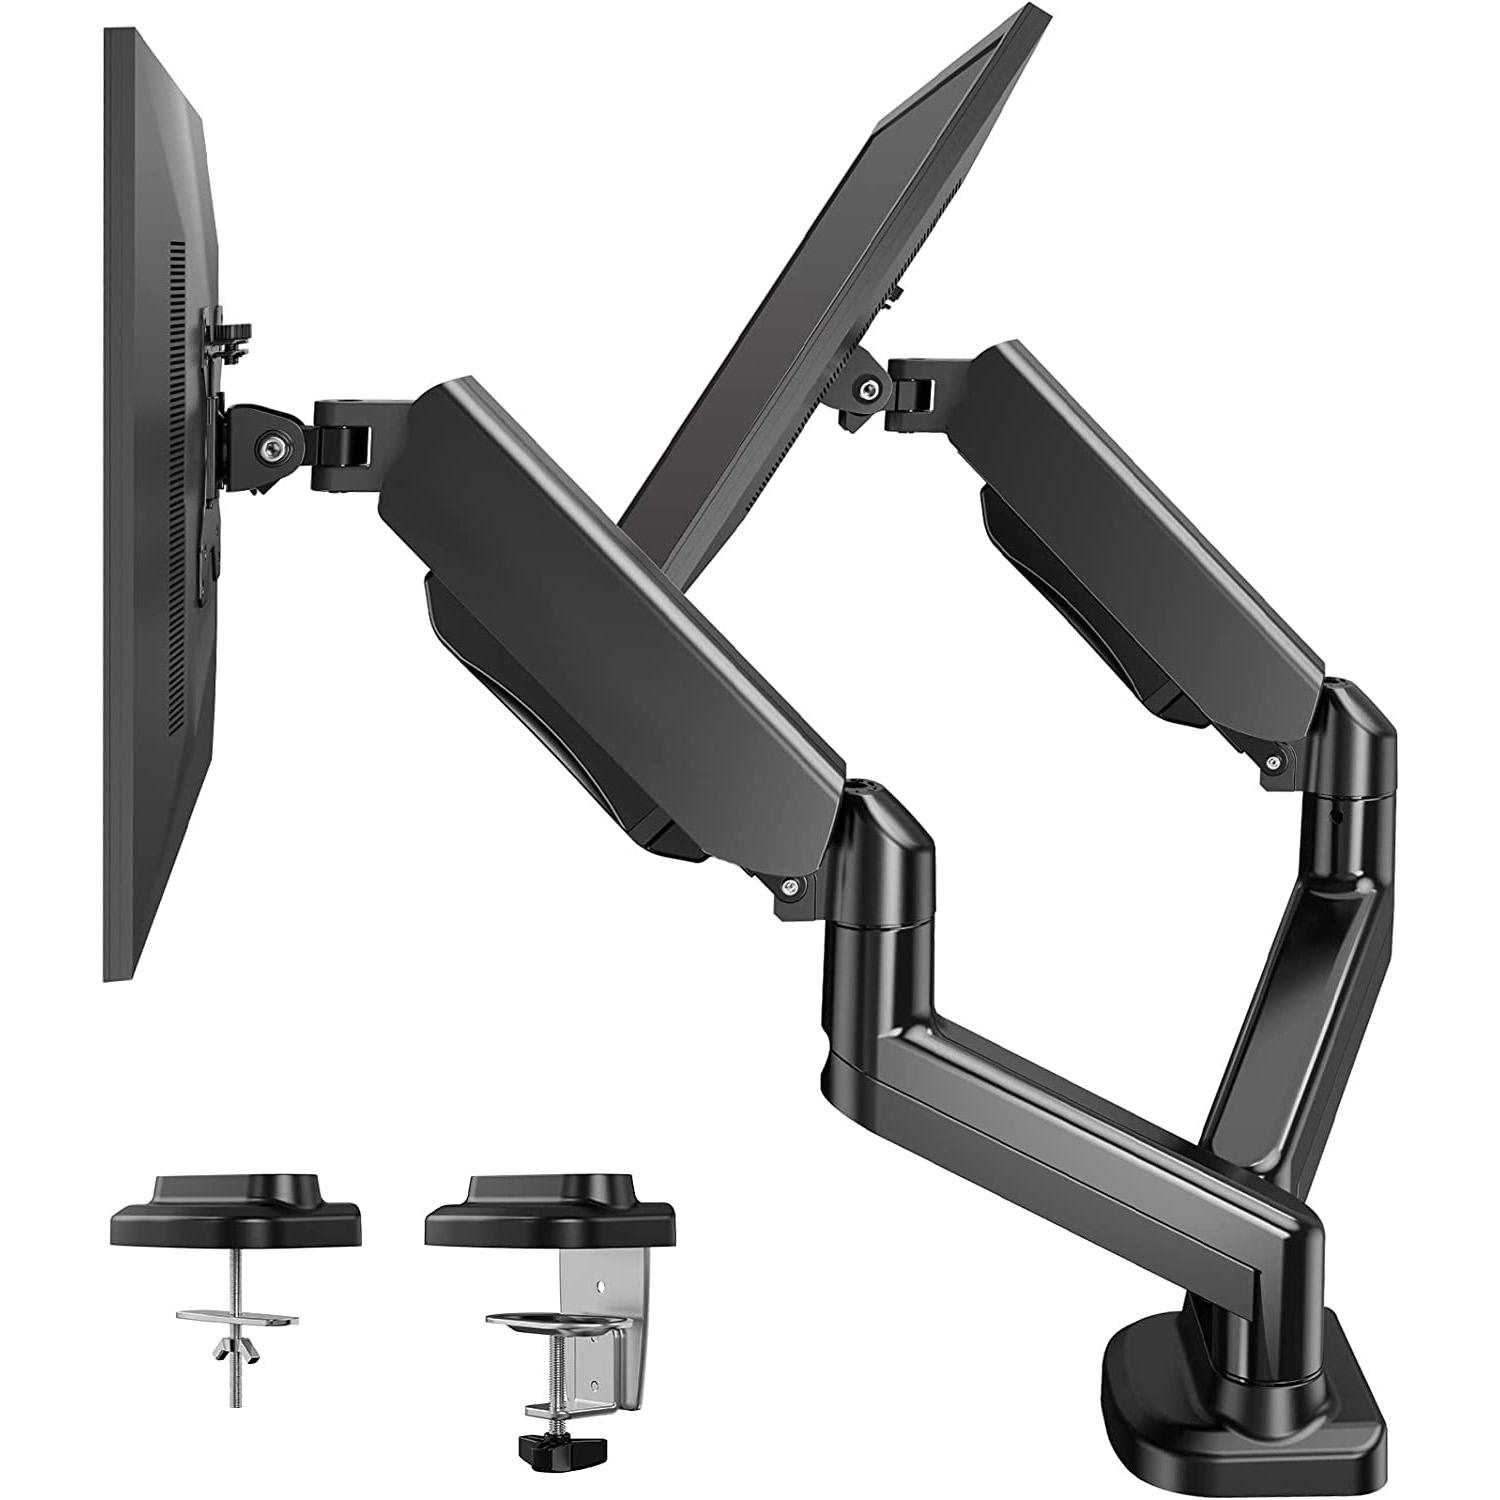 Dual Arm Adjustable Gas Spring VESA Monitor Mount for $31.67 Shipped